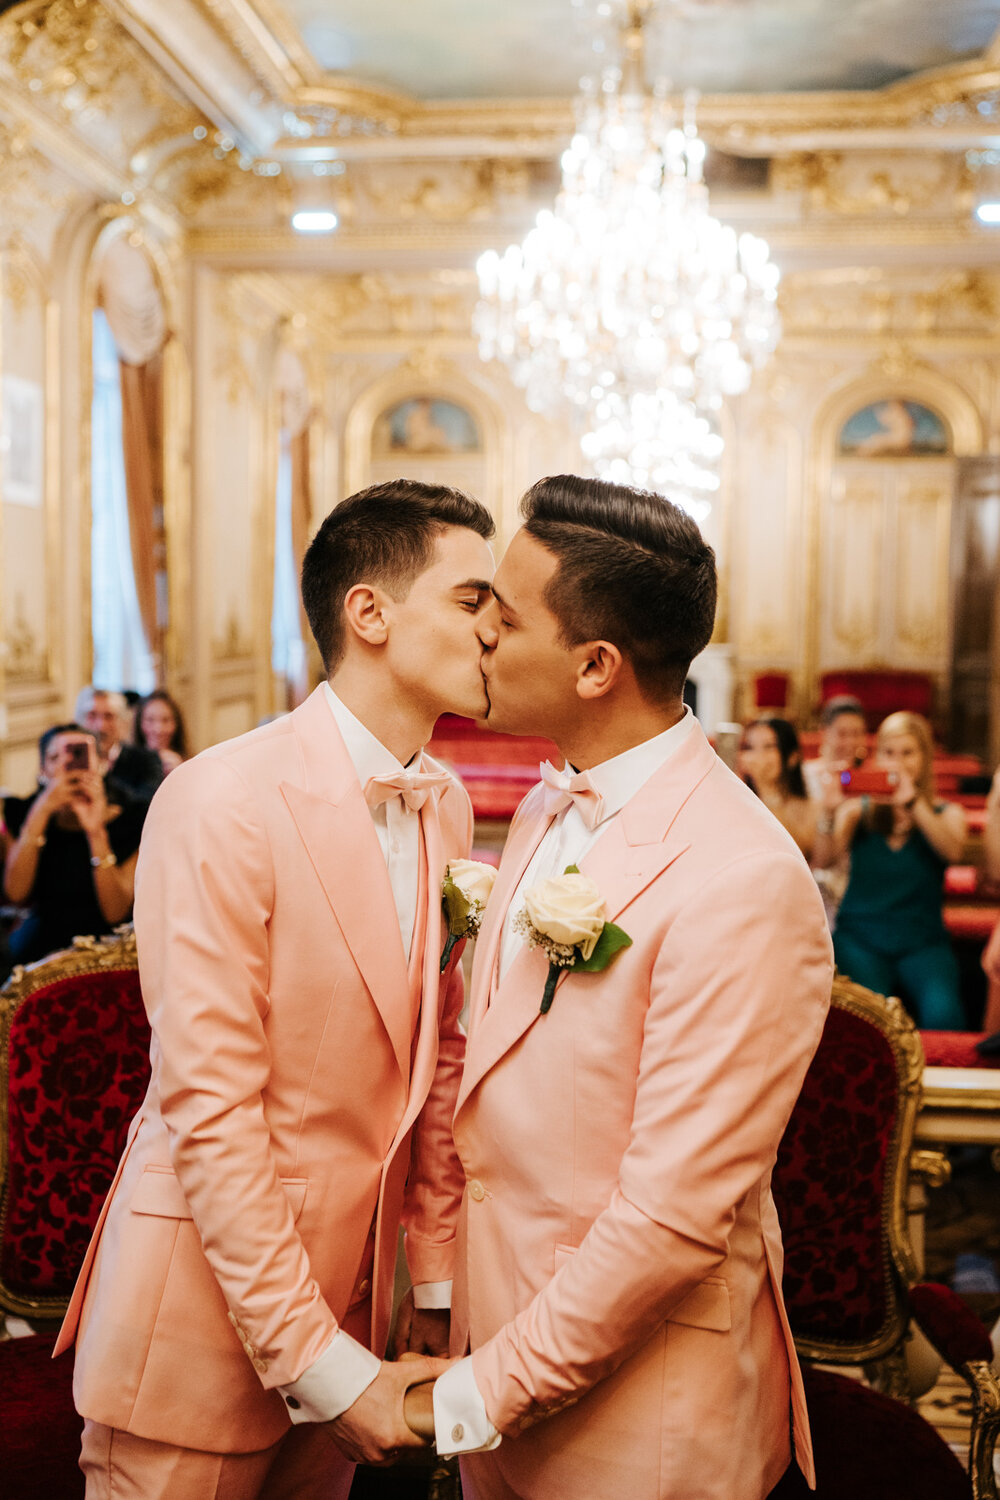  First kiss between both grooms as they are pronounced husband and husband 